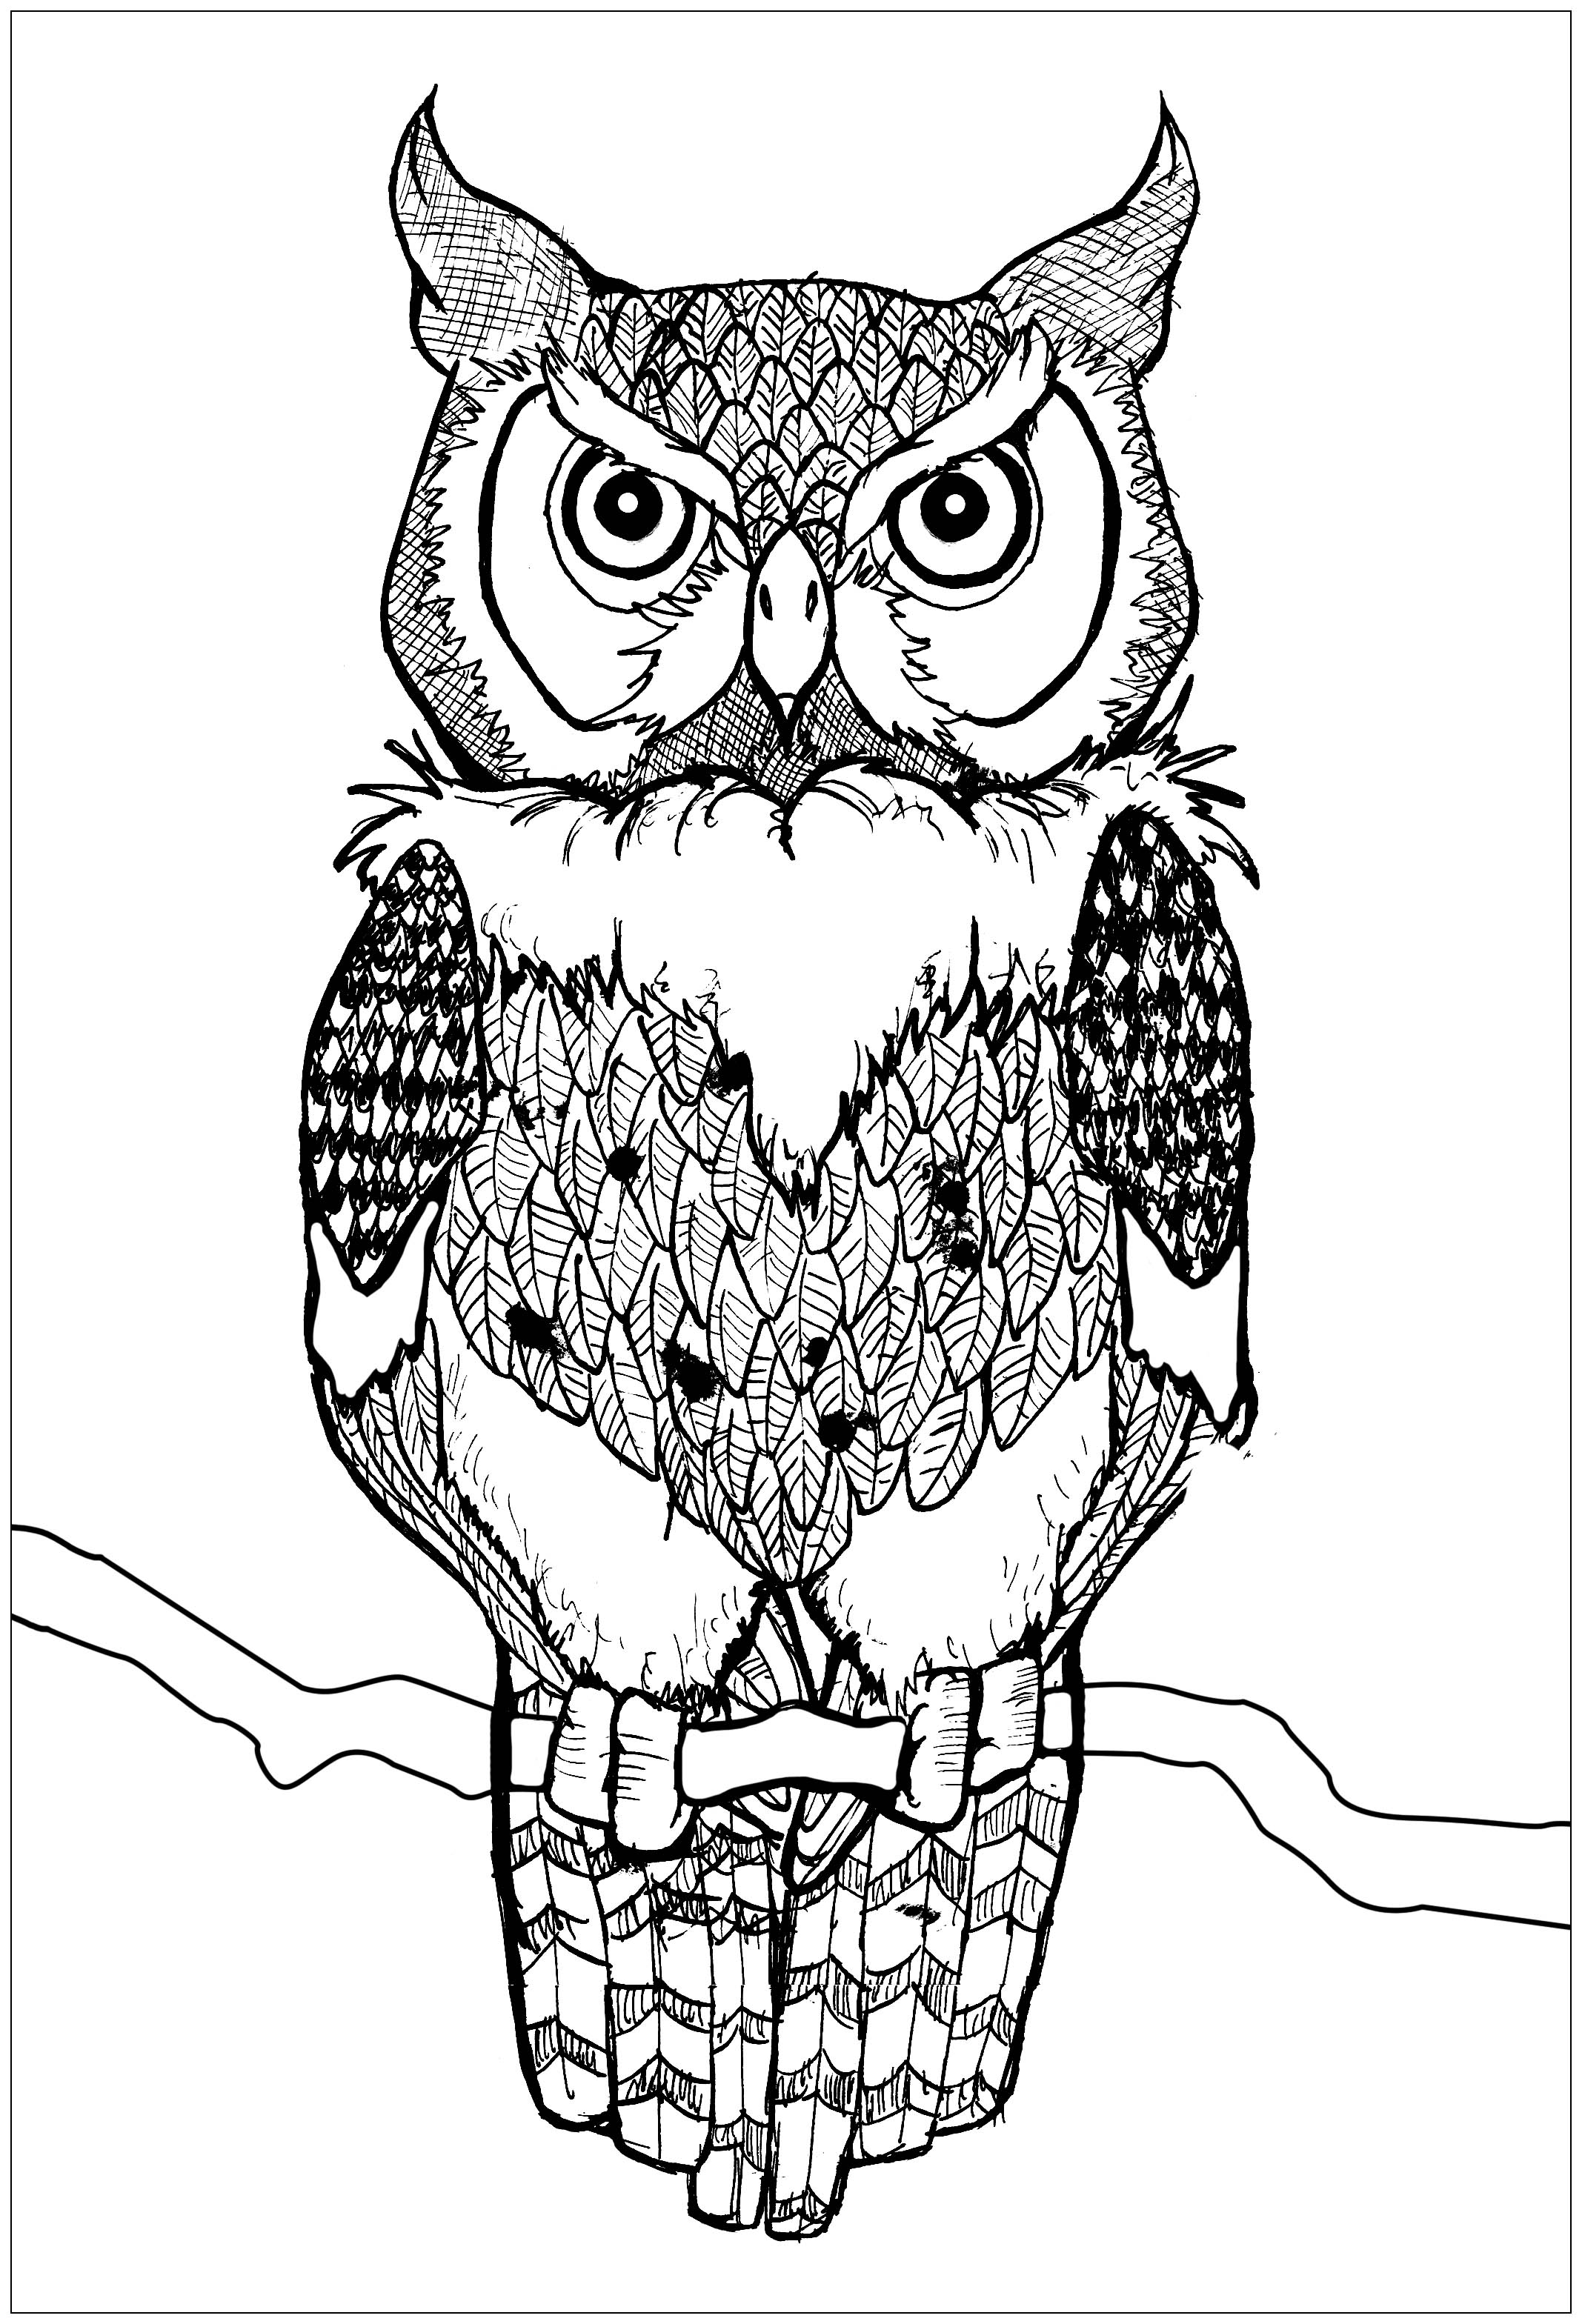 Free Owl Drawing To Download And Color Owls Kids Coloring Pages